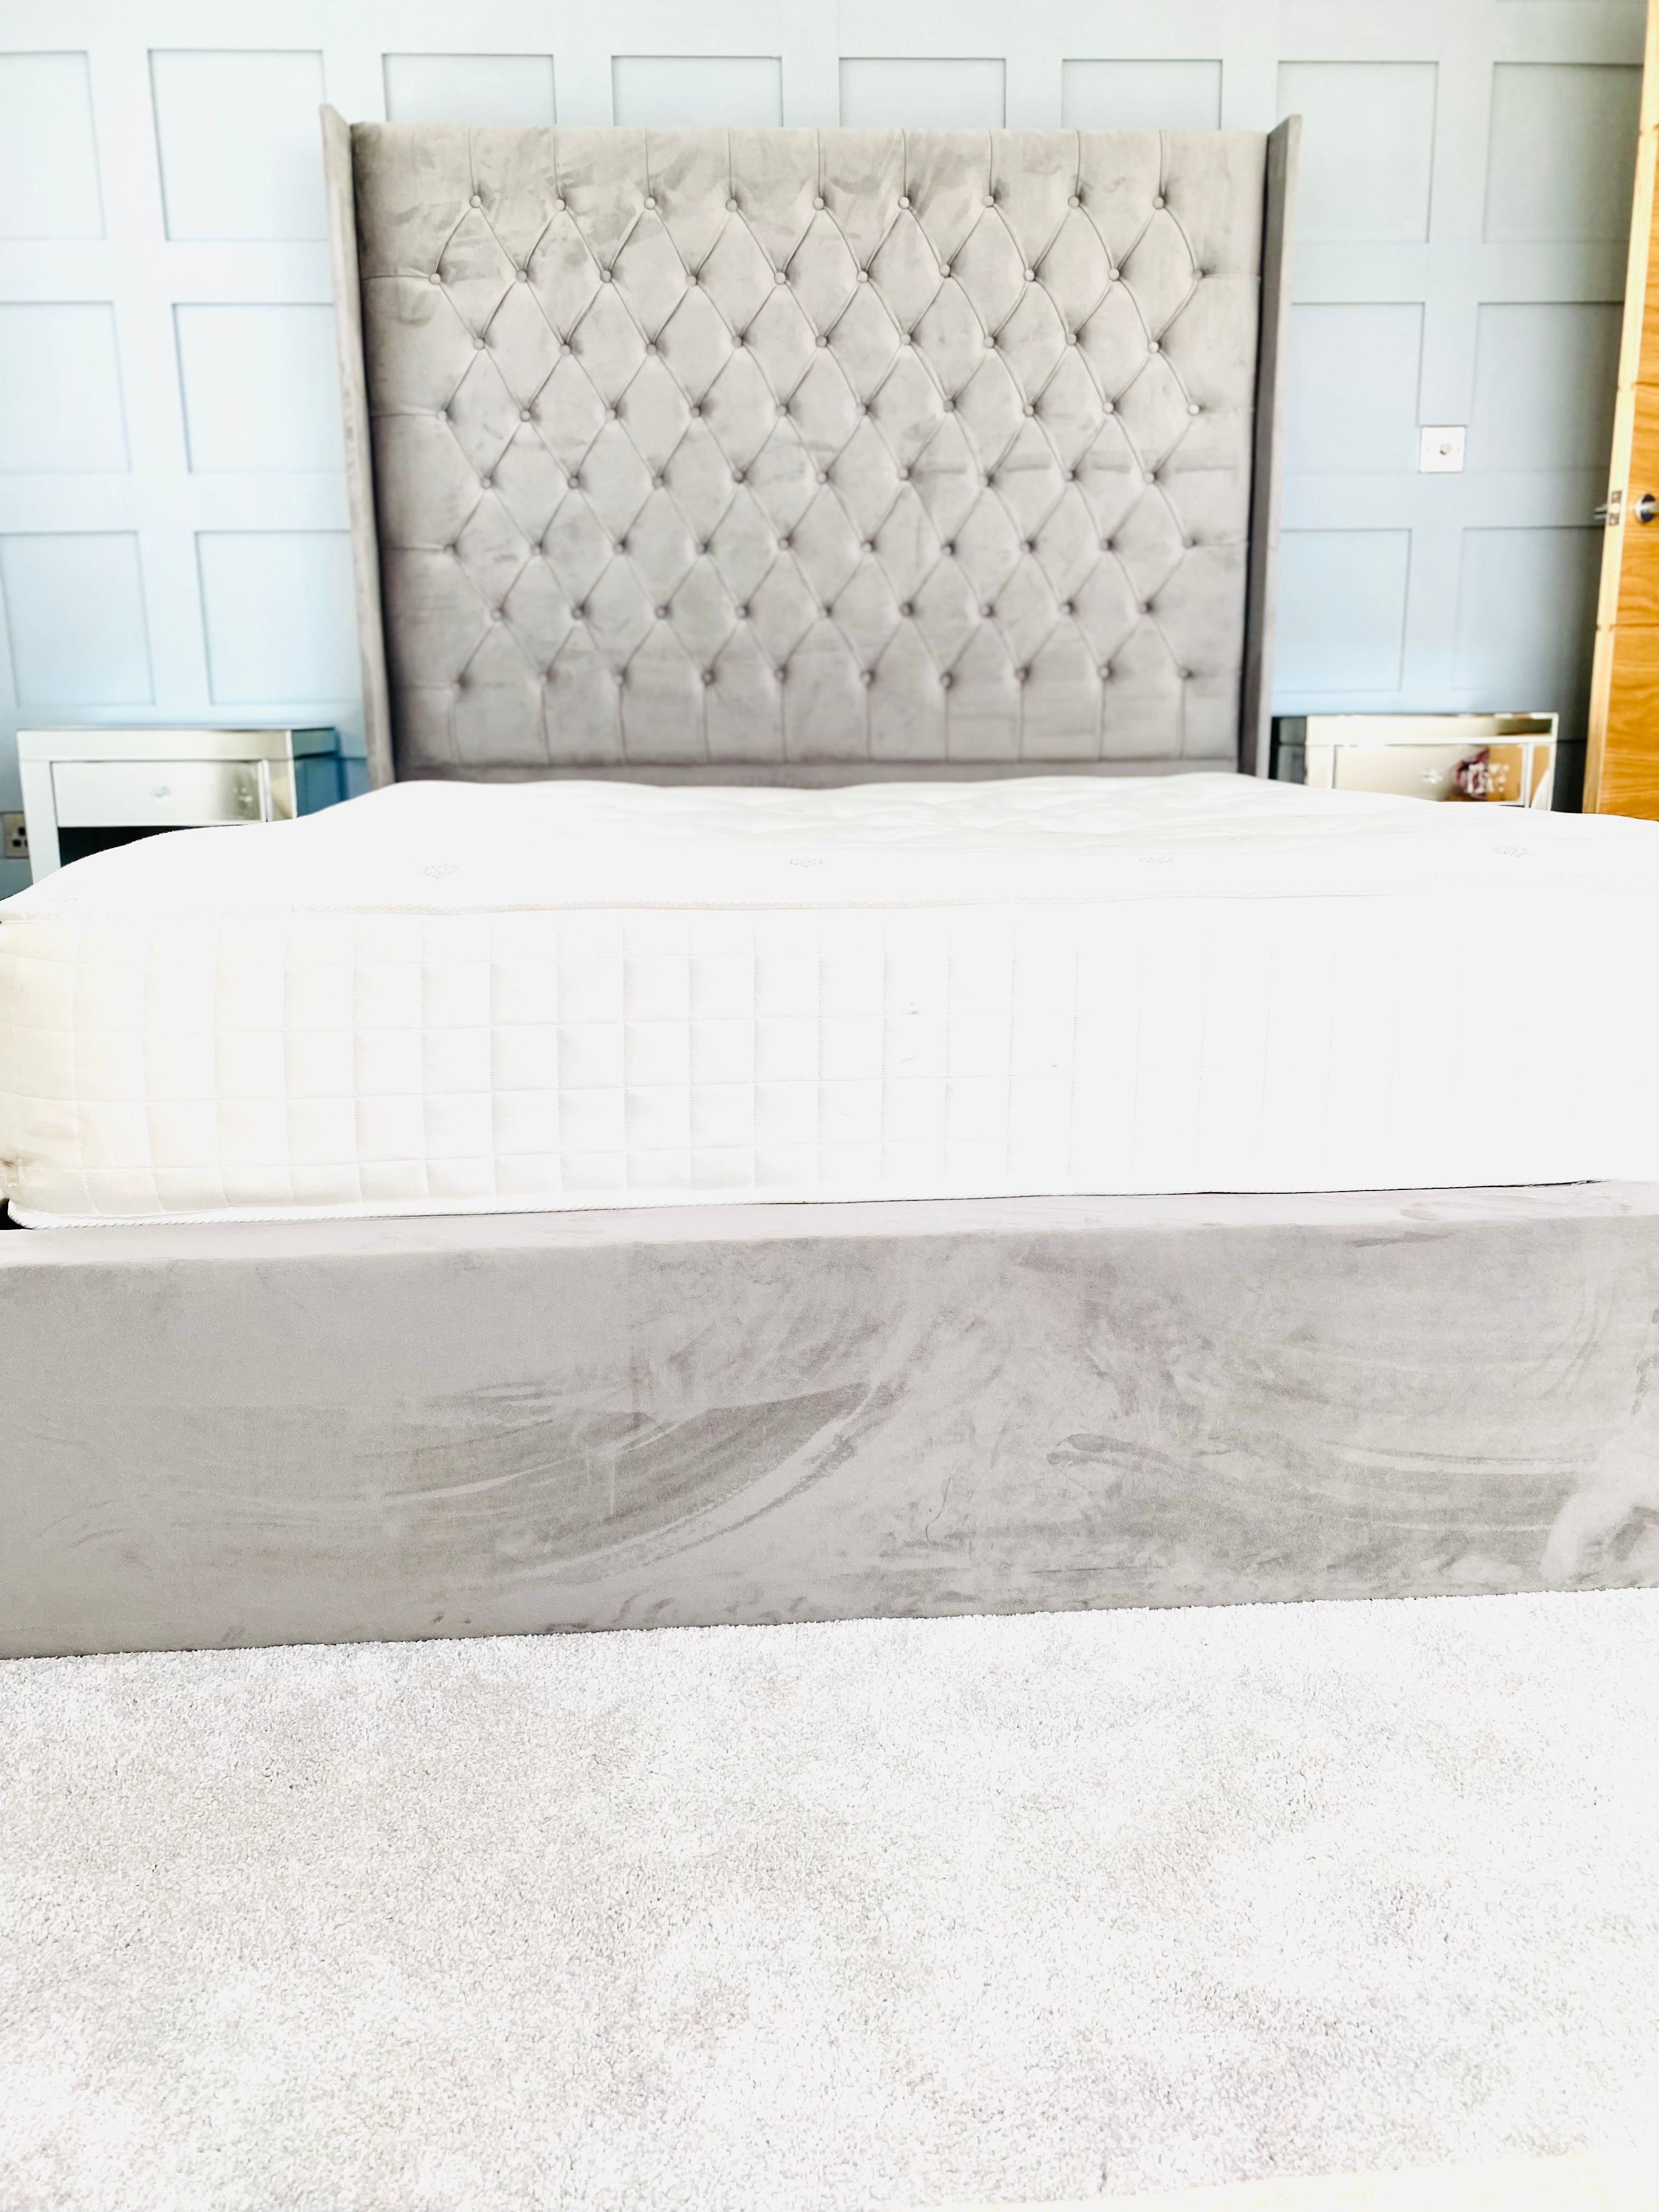 The Bespoke Chesterfield Wing Bed